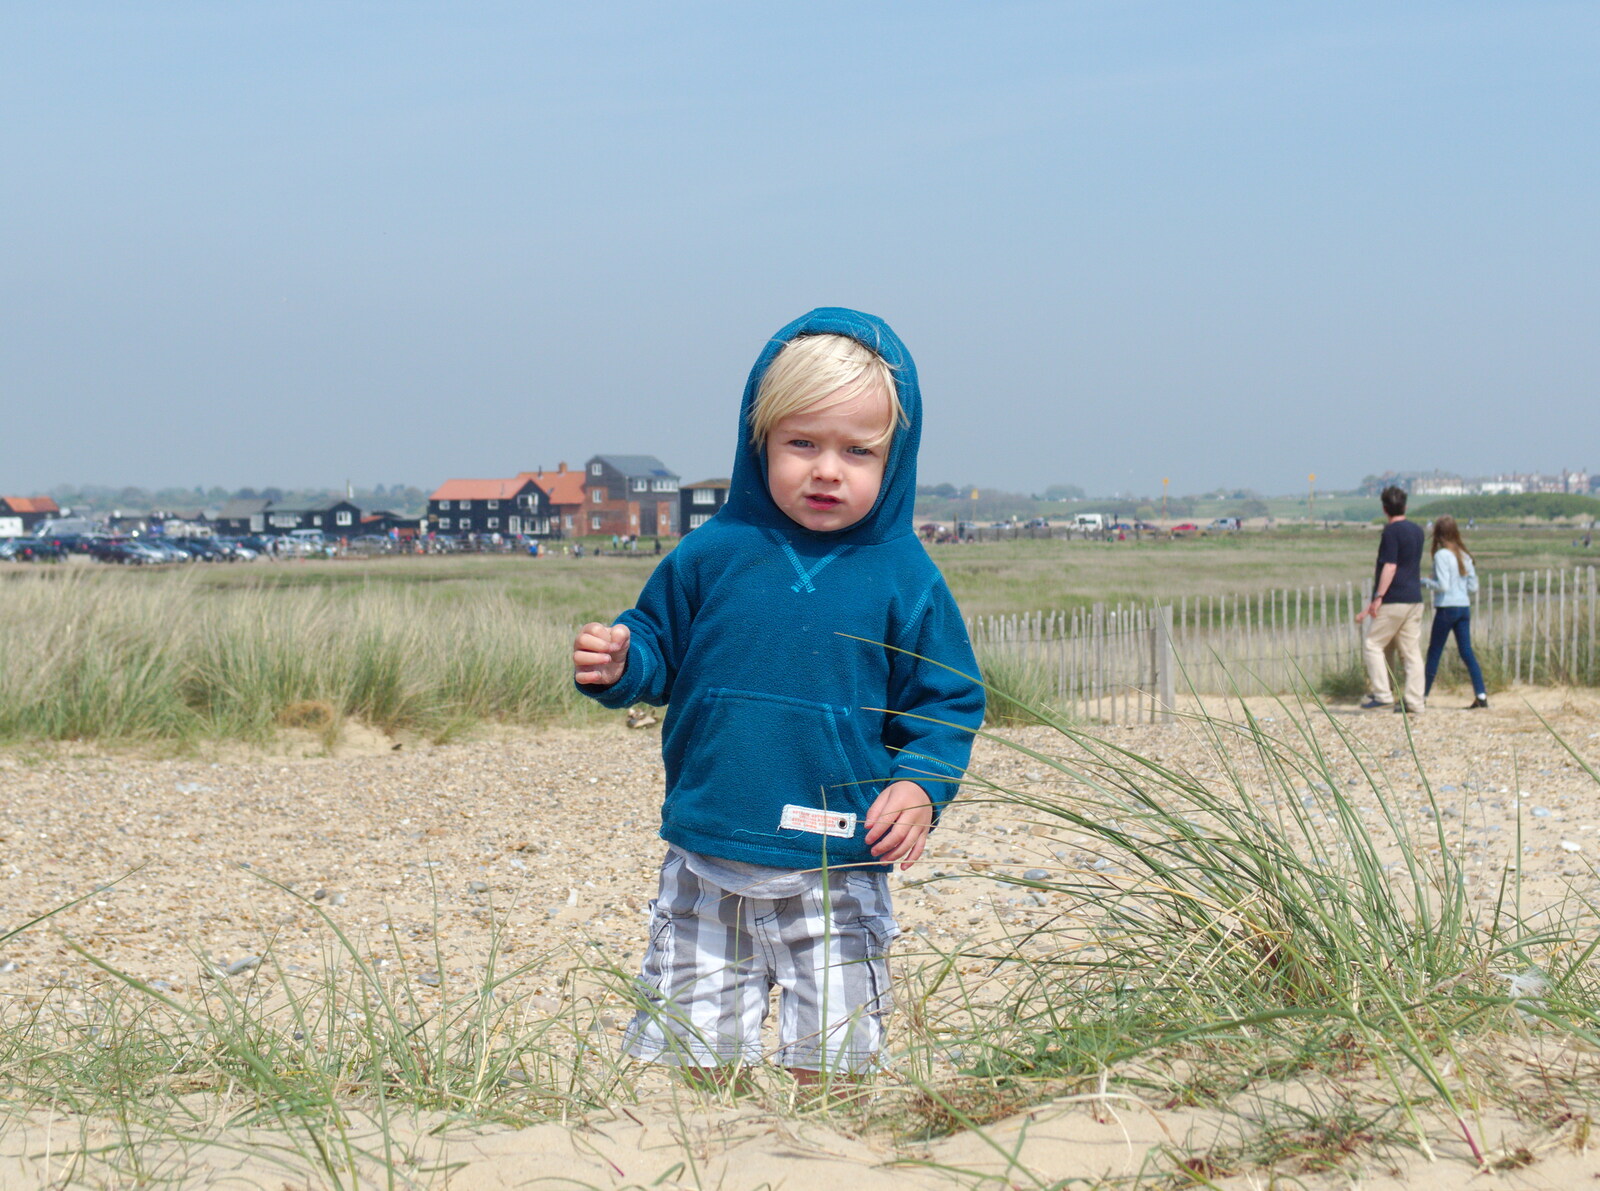 Harry roams around in the dunes from Life's A Windy Beach, Walberswick, Suffolk - 5th May 2014